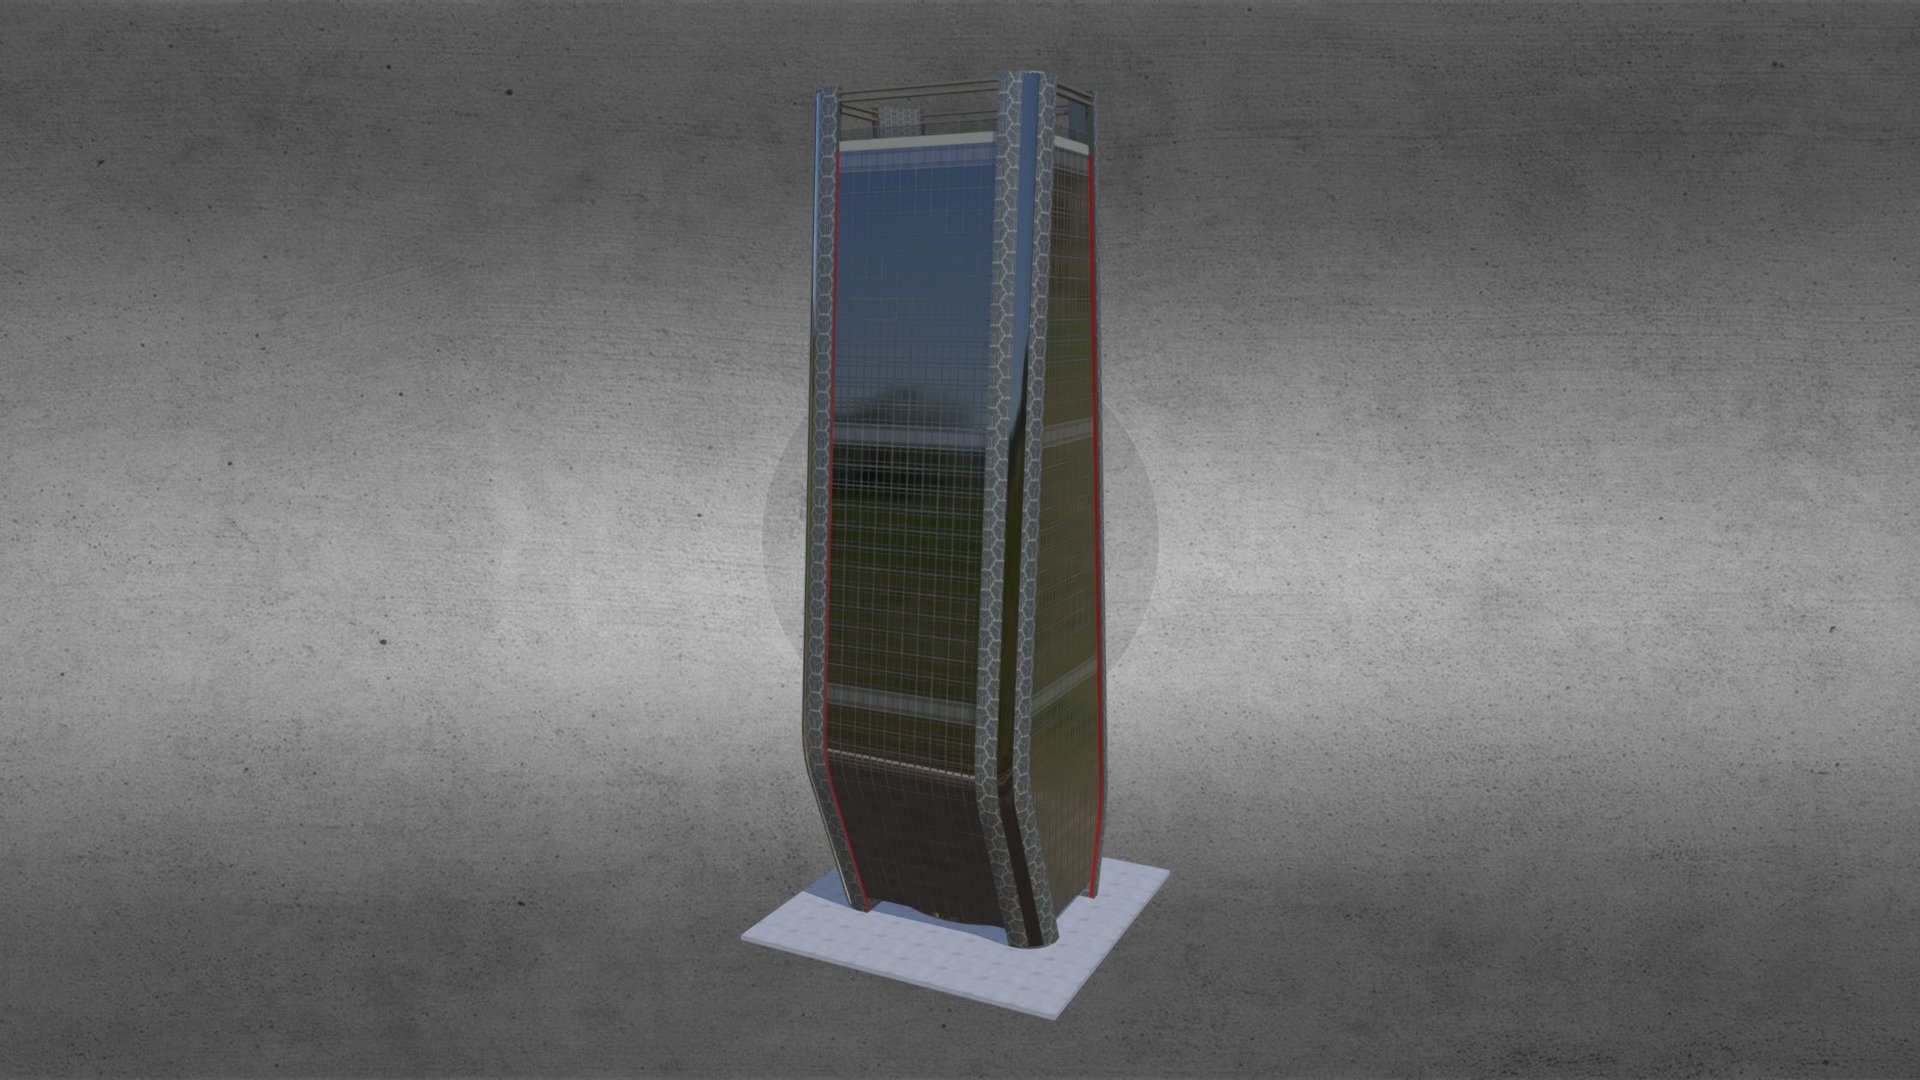 3D model Utopia 7b - This is a 3D model of the Utopia 7b. The 3D model is about a rectangular object with a glass top.